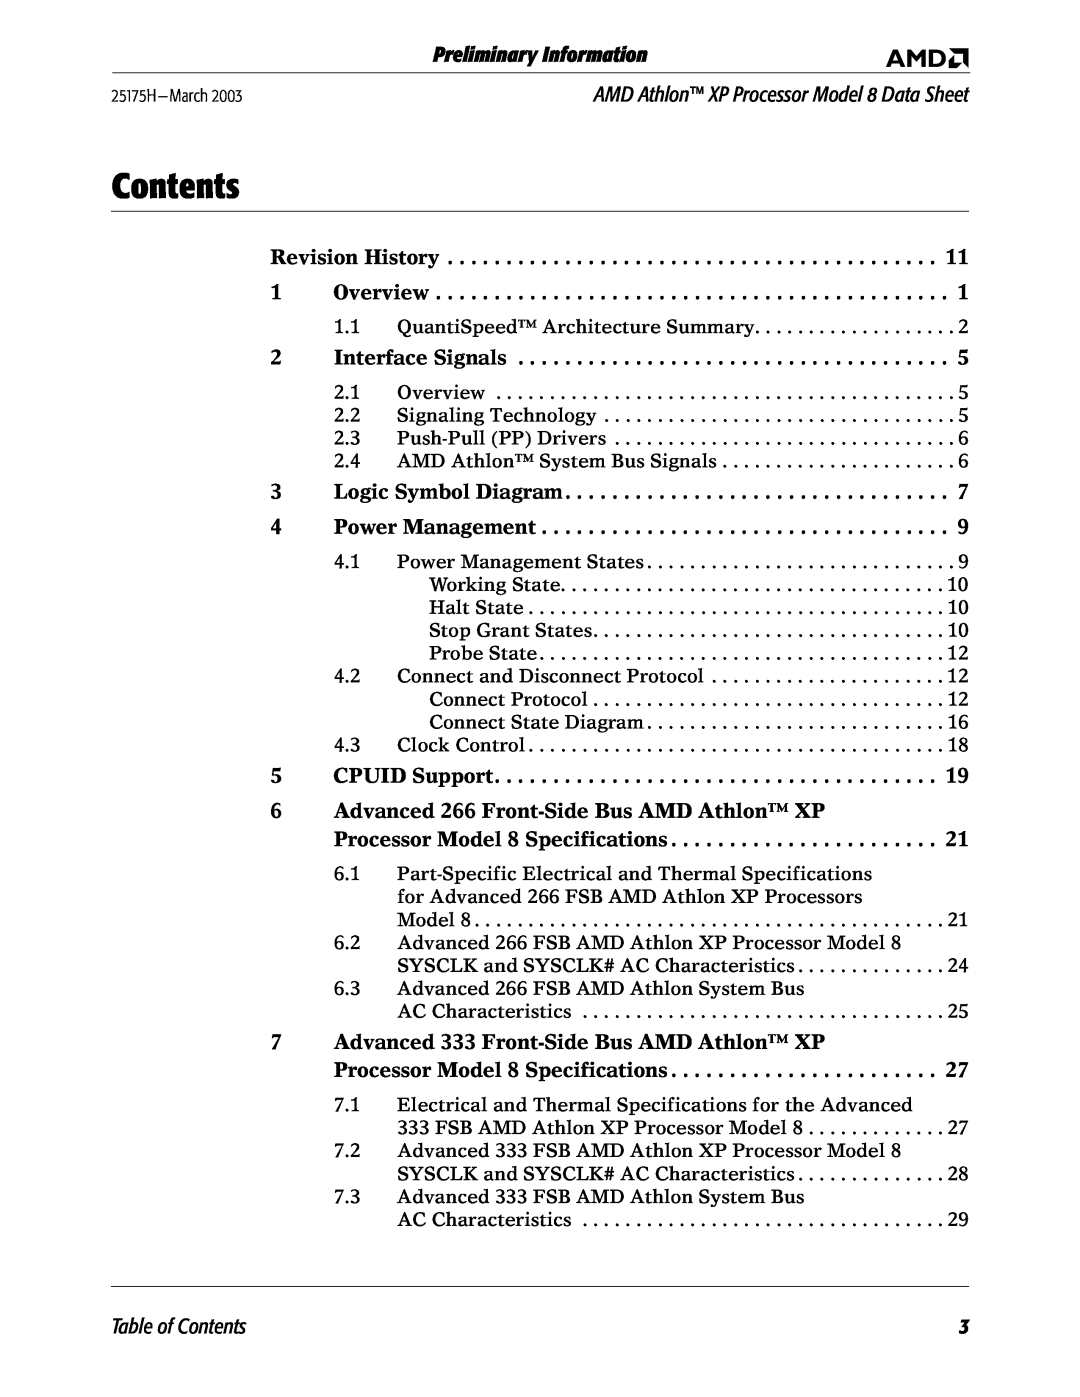 AMD 8 manual Revision History 1 Overview, Interface Signals, Logic Symbol Diagram 4 Power Management, Table of Contents 